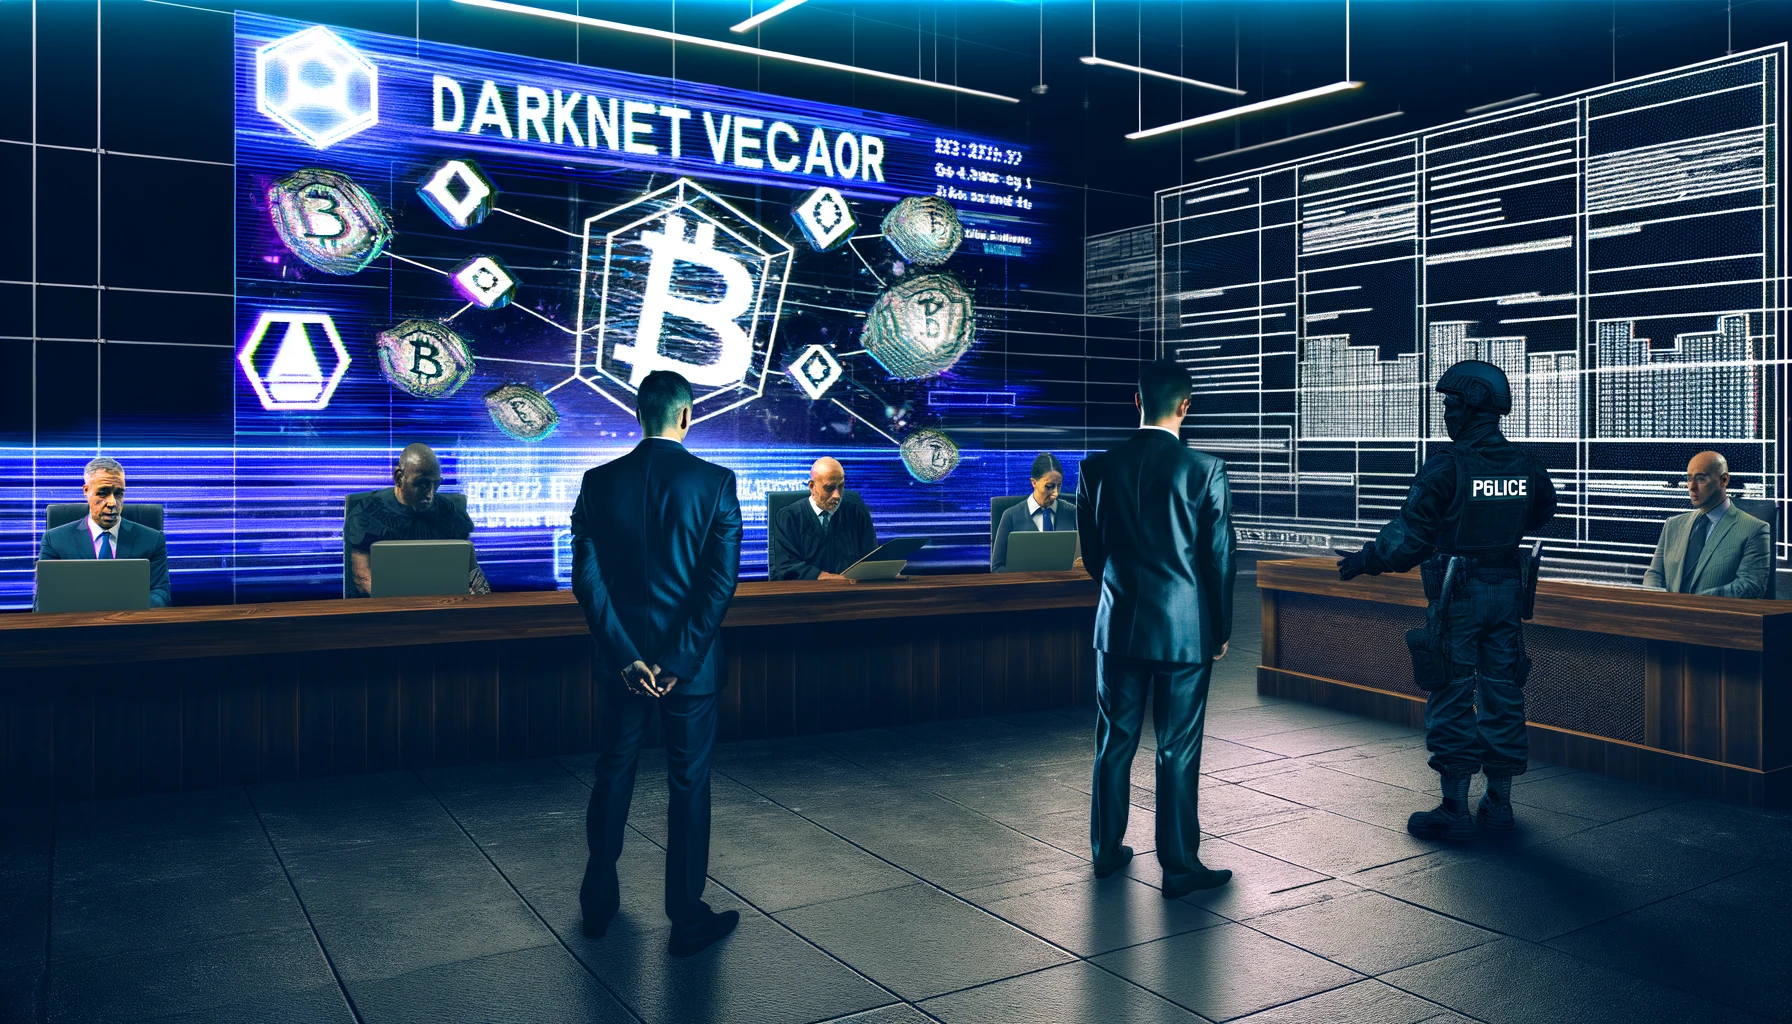 Darknet Vendor Sentenced in San Diego Forfeits Crypto Funds